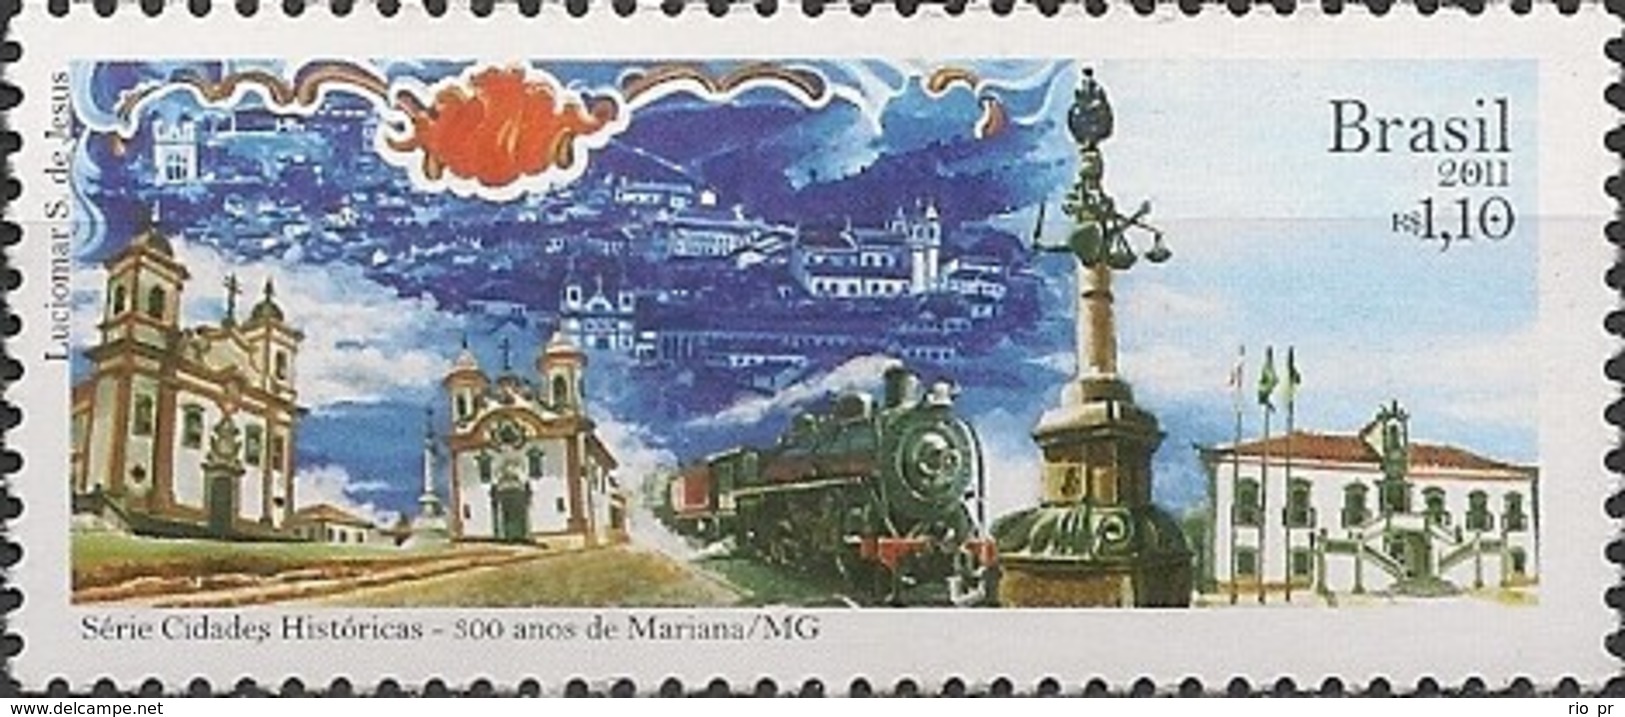 BRAZIL - HISTORICAL TOWNS SERIES, 300 YEARS OF MARIANA/MG 2011 - MNH - Unused Stamps